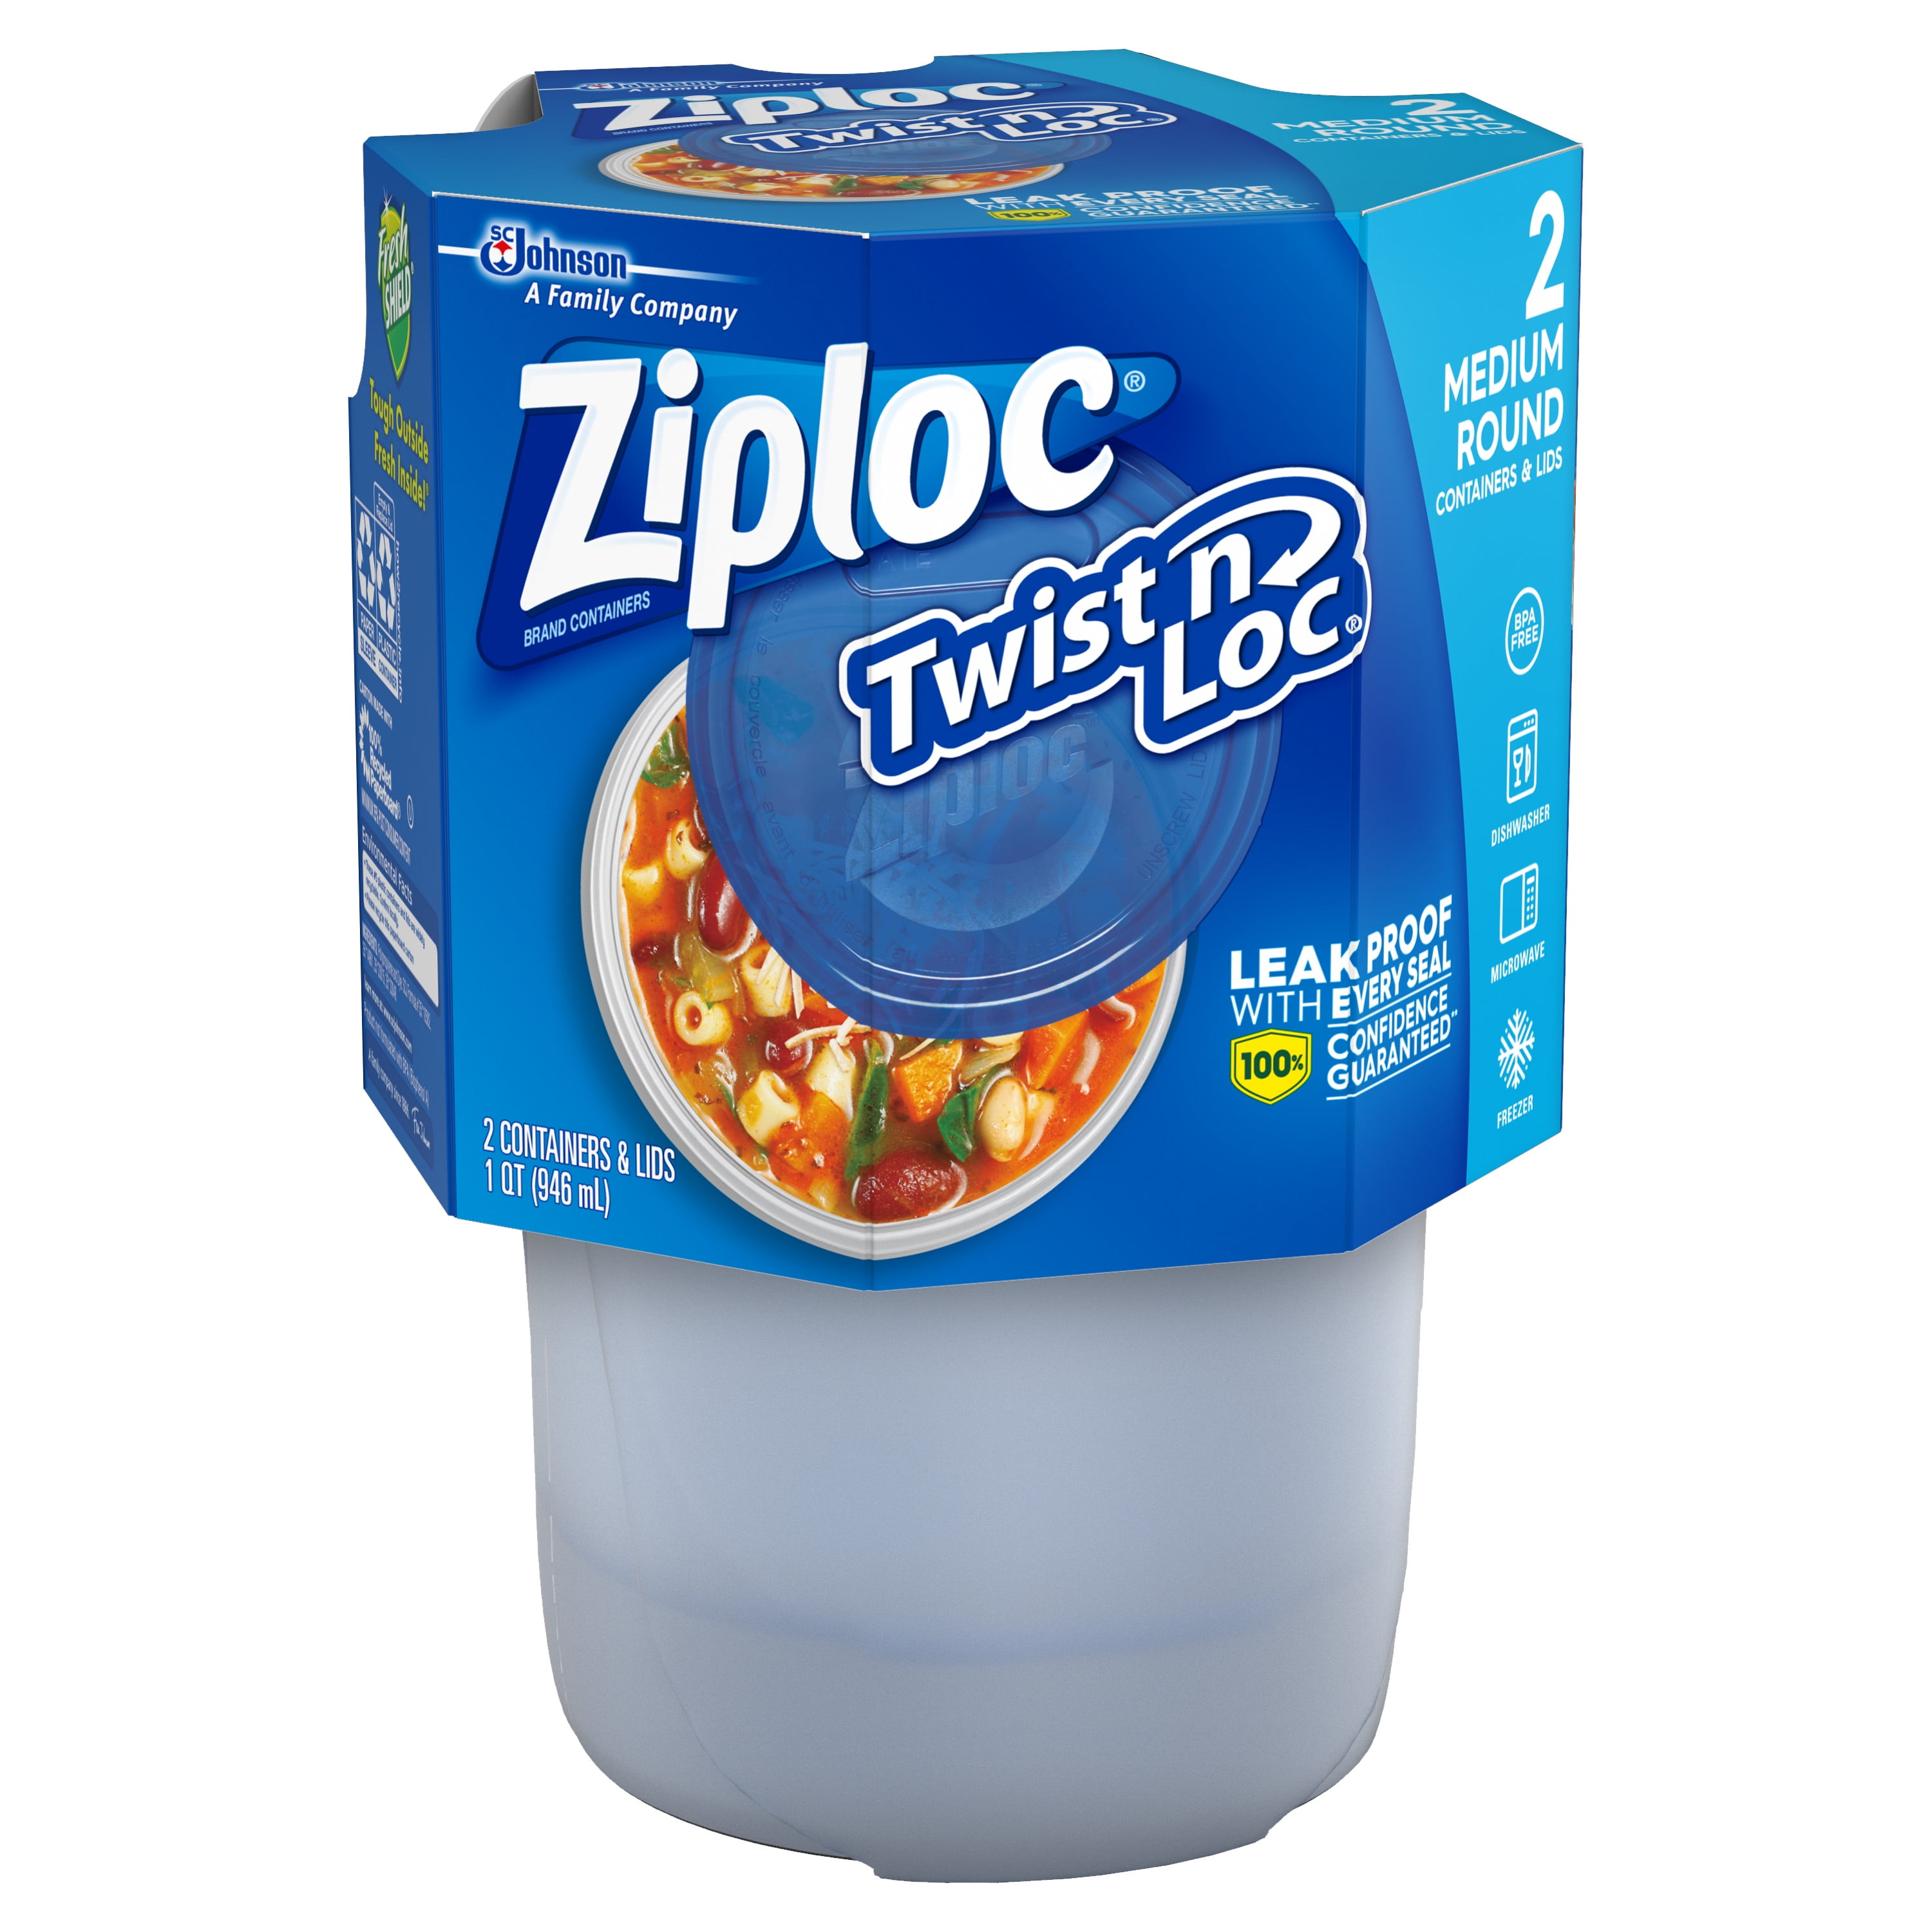 Ziploc Twist 'n Loc Container Variety Lunch Pack - Shop Food Storage at  H-E-B